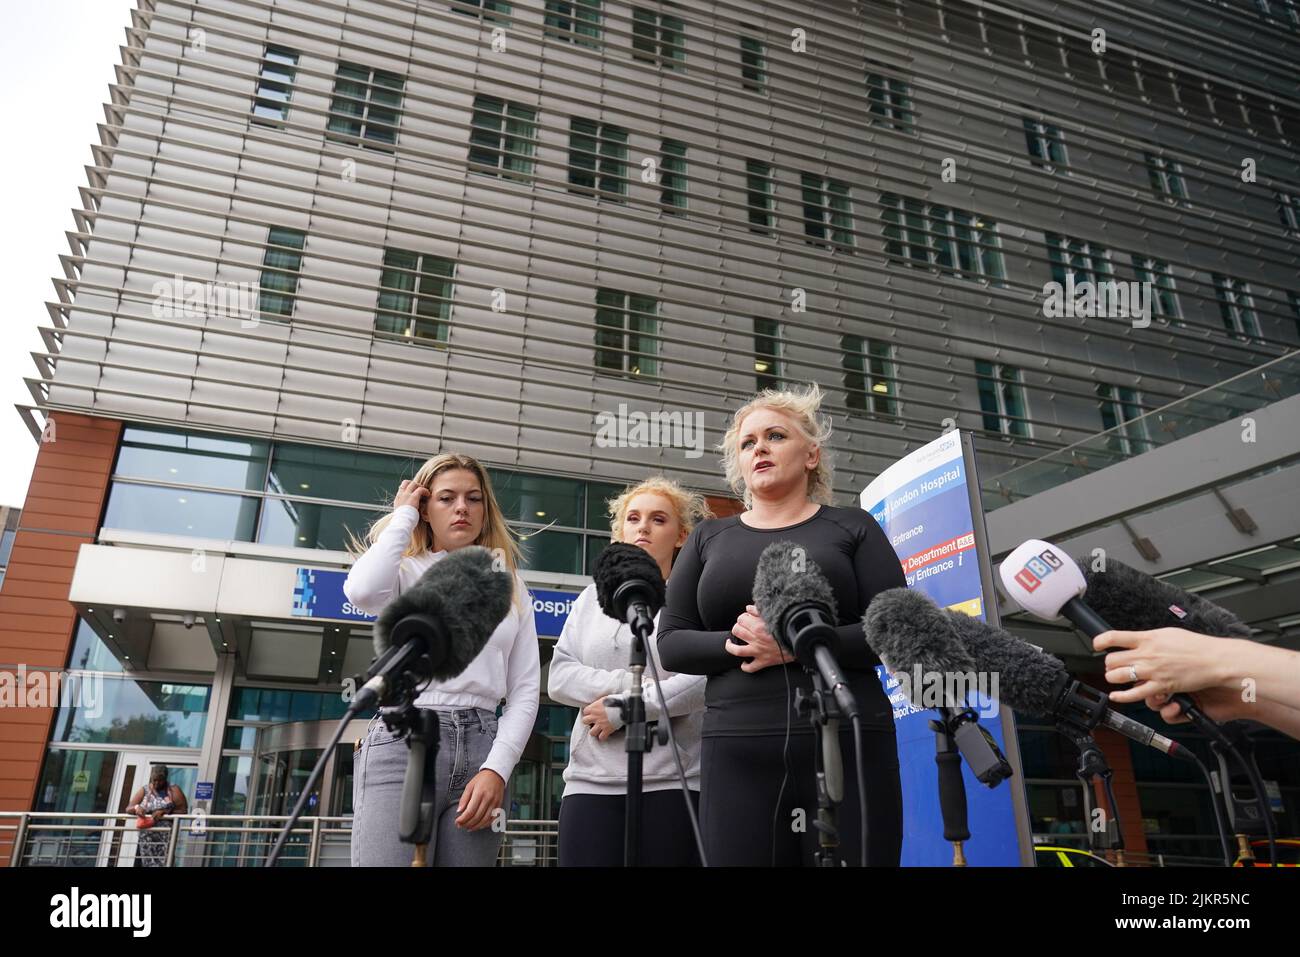 The mother of Archie Battersbee, Hollie Dance (right), speaks to the media outside the Royal London hospital in Whitechapel, east London. His parents have submitted an application to the European Court of Human Rights in a bid to postpone the withdrawal of his life support. Picture date: Wednesday August 3, 2022. Stock Photo